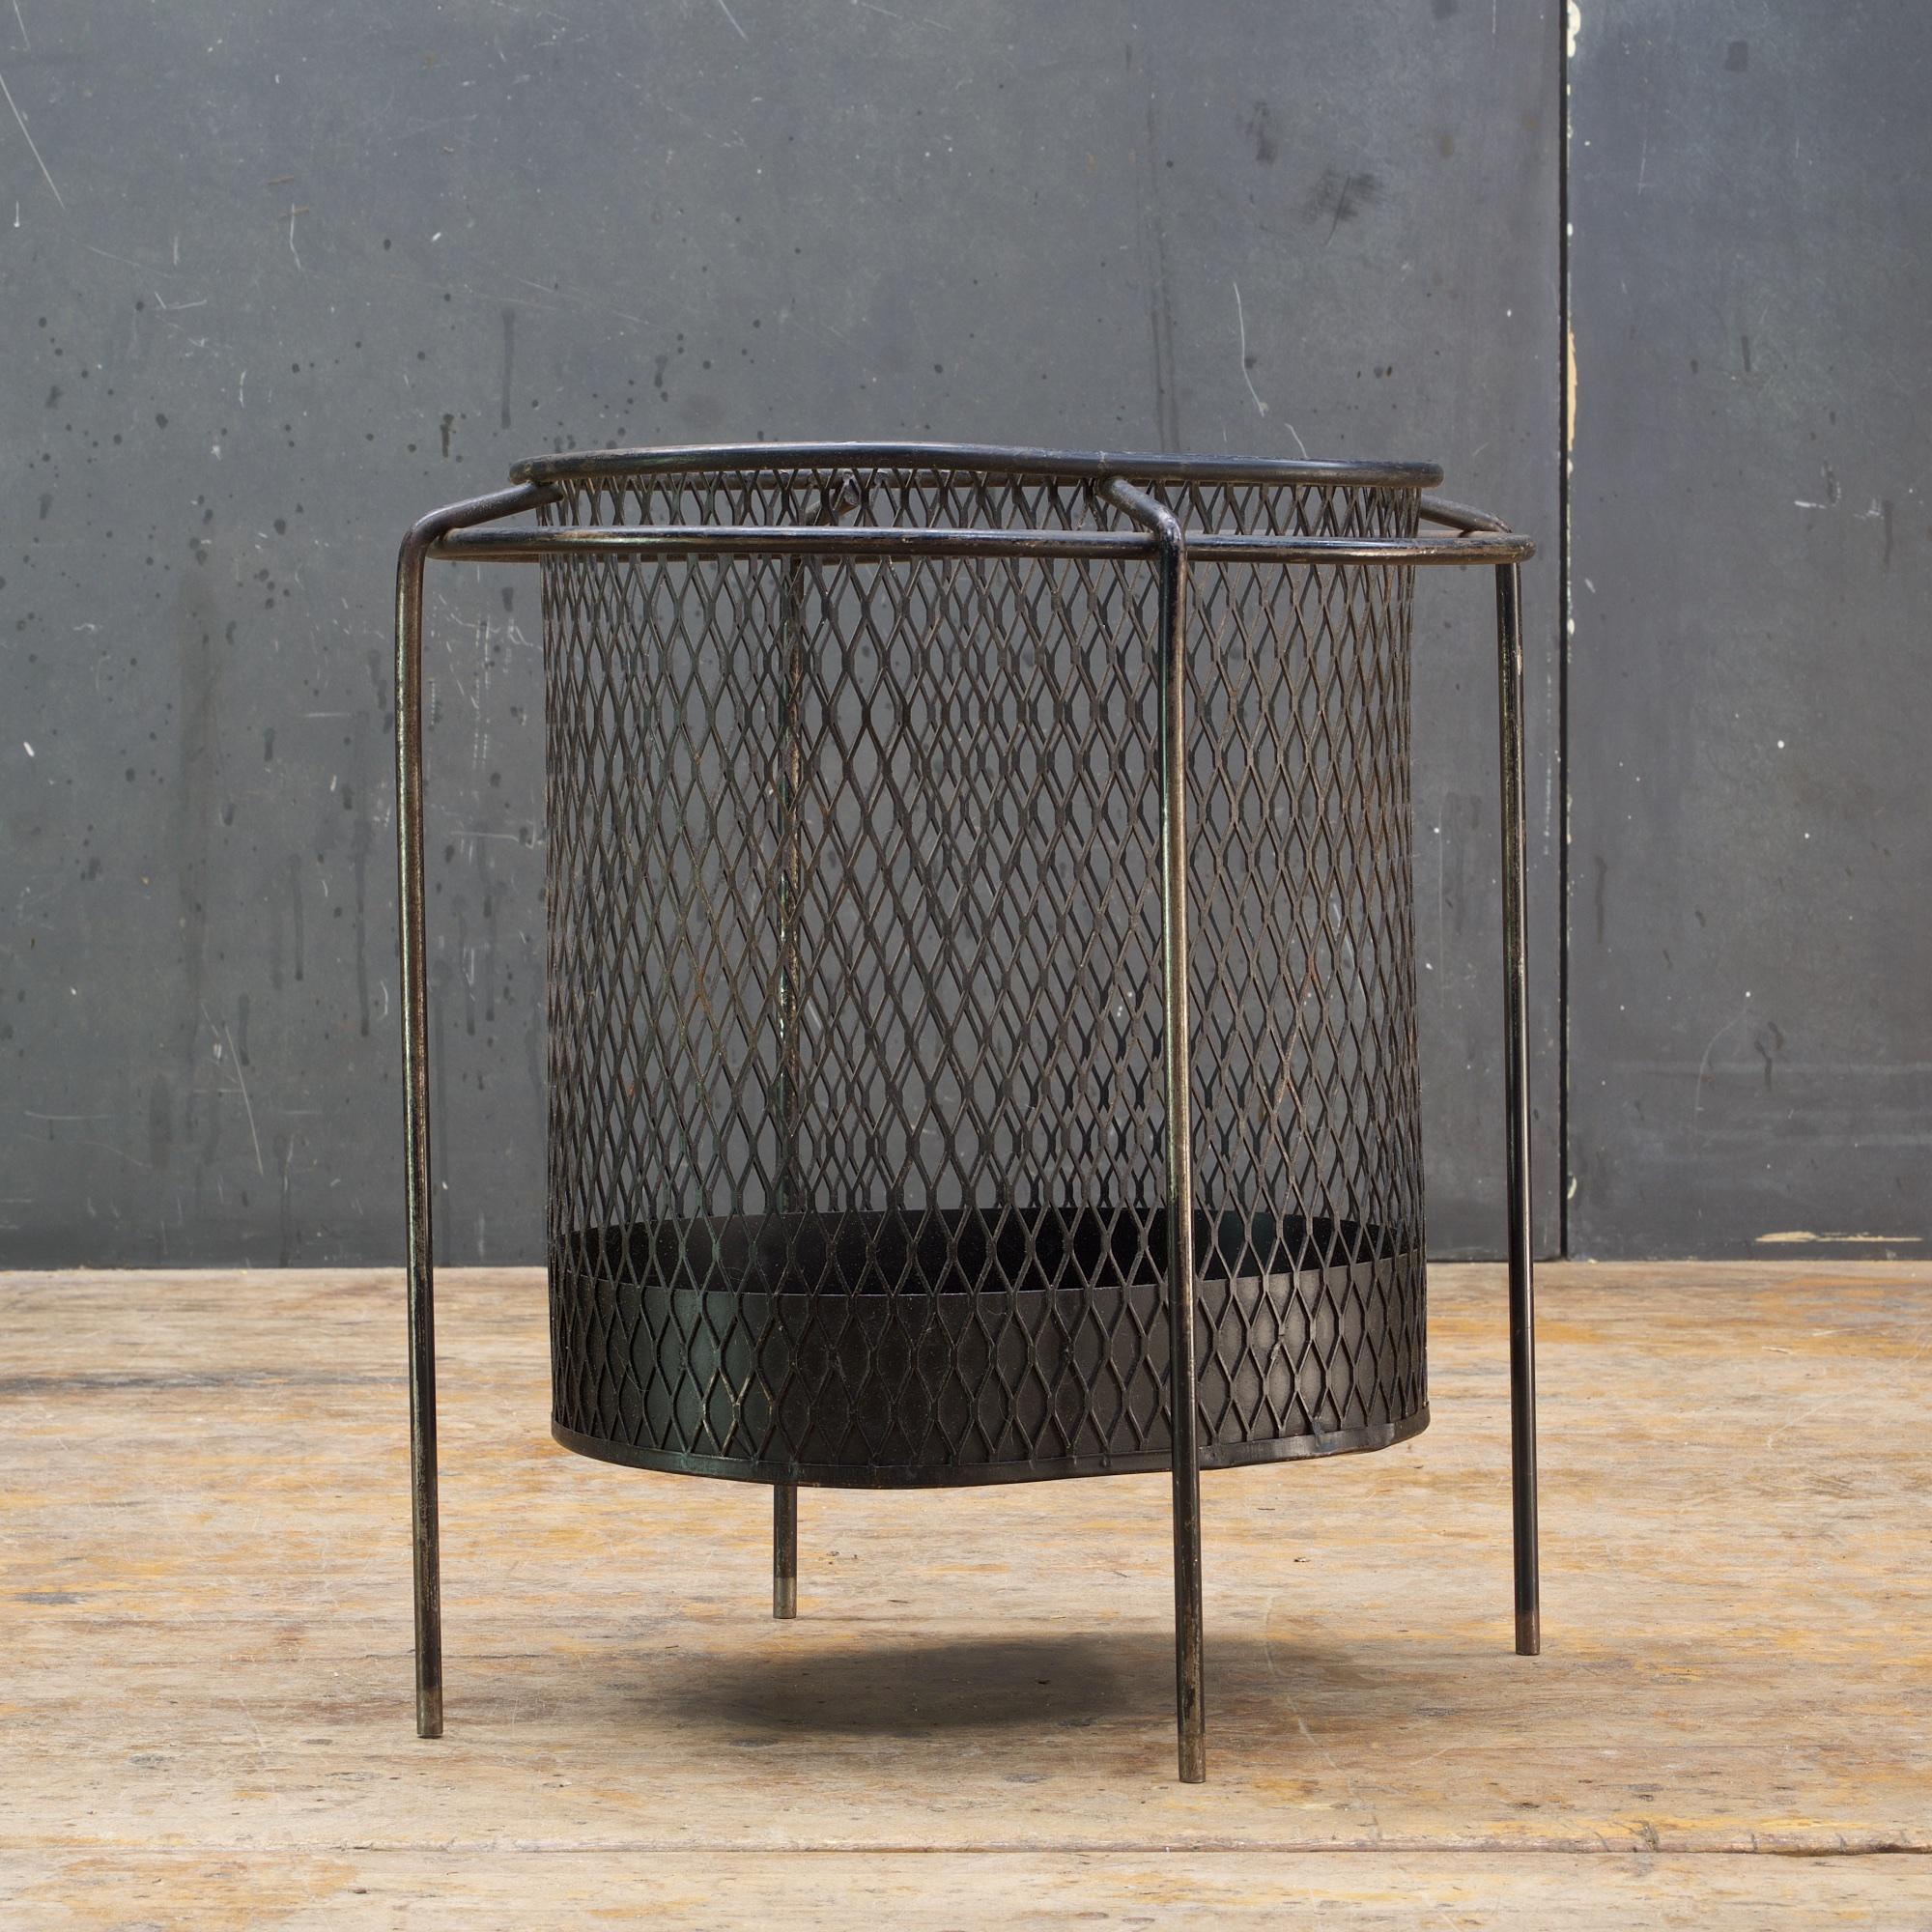 Black enameled steel suspended basket in iron rod frame. Showing some wear and bend to iron rods.